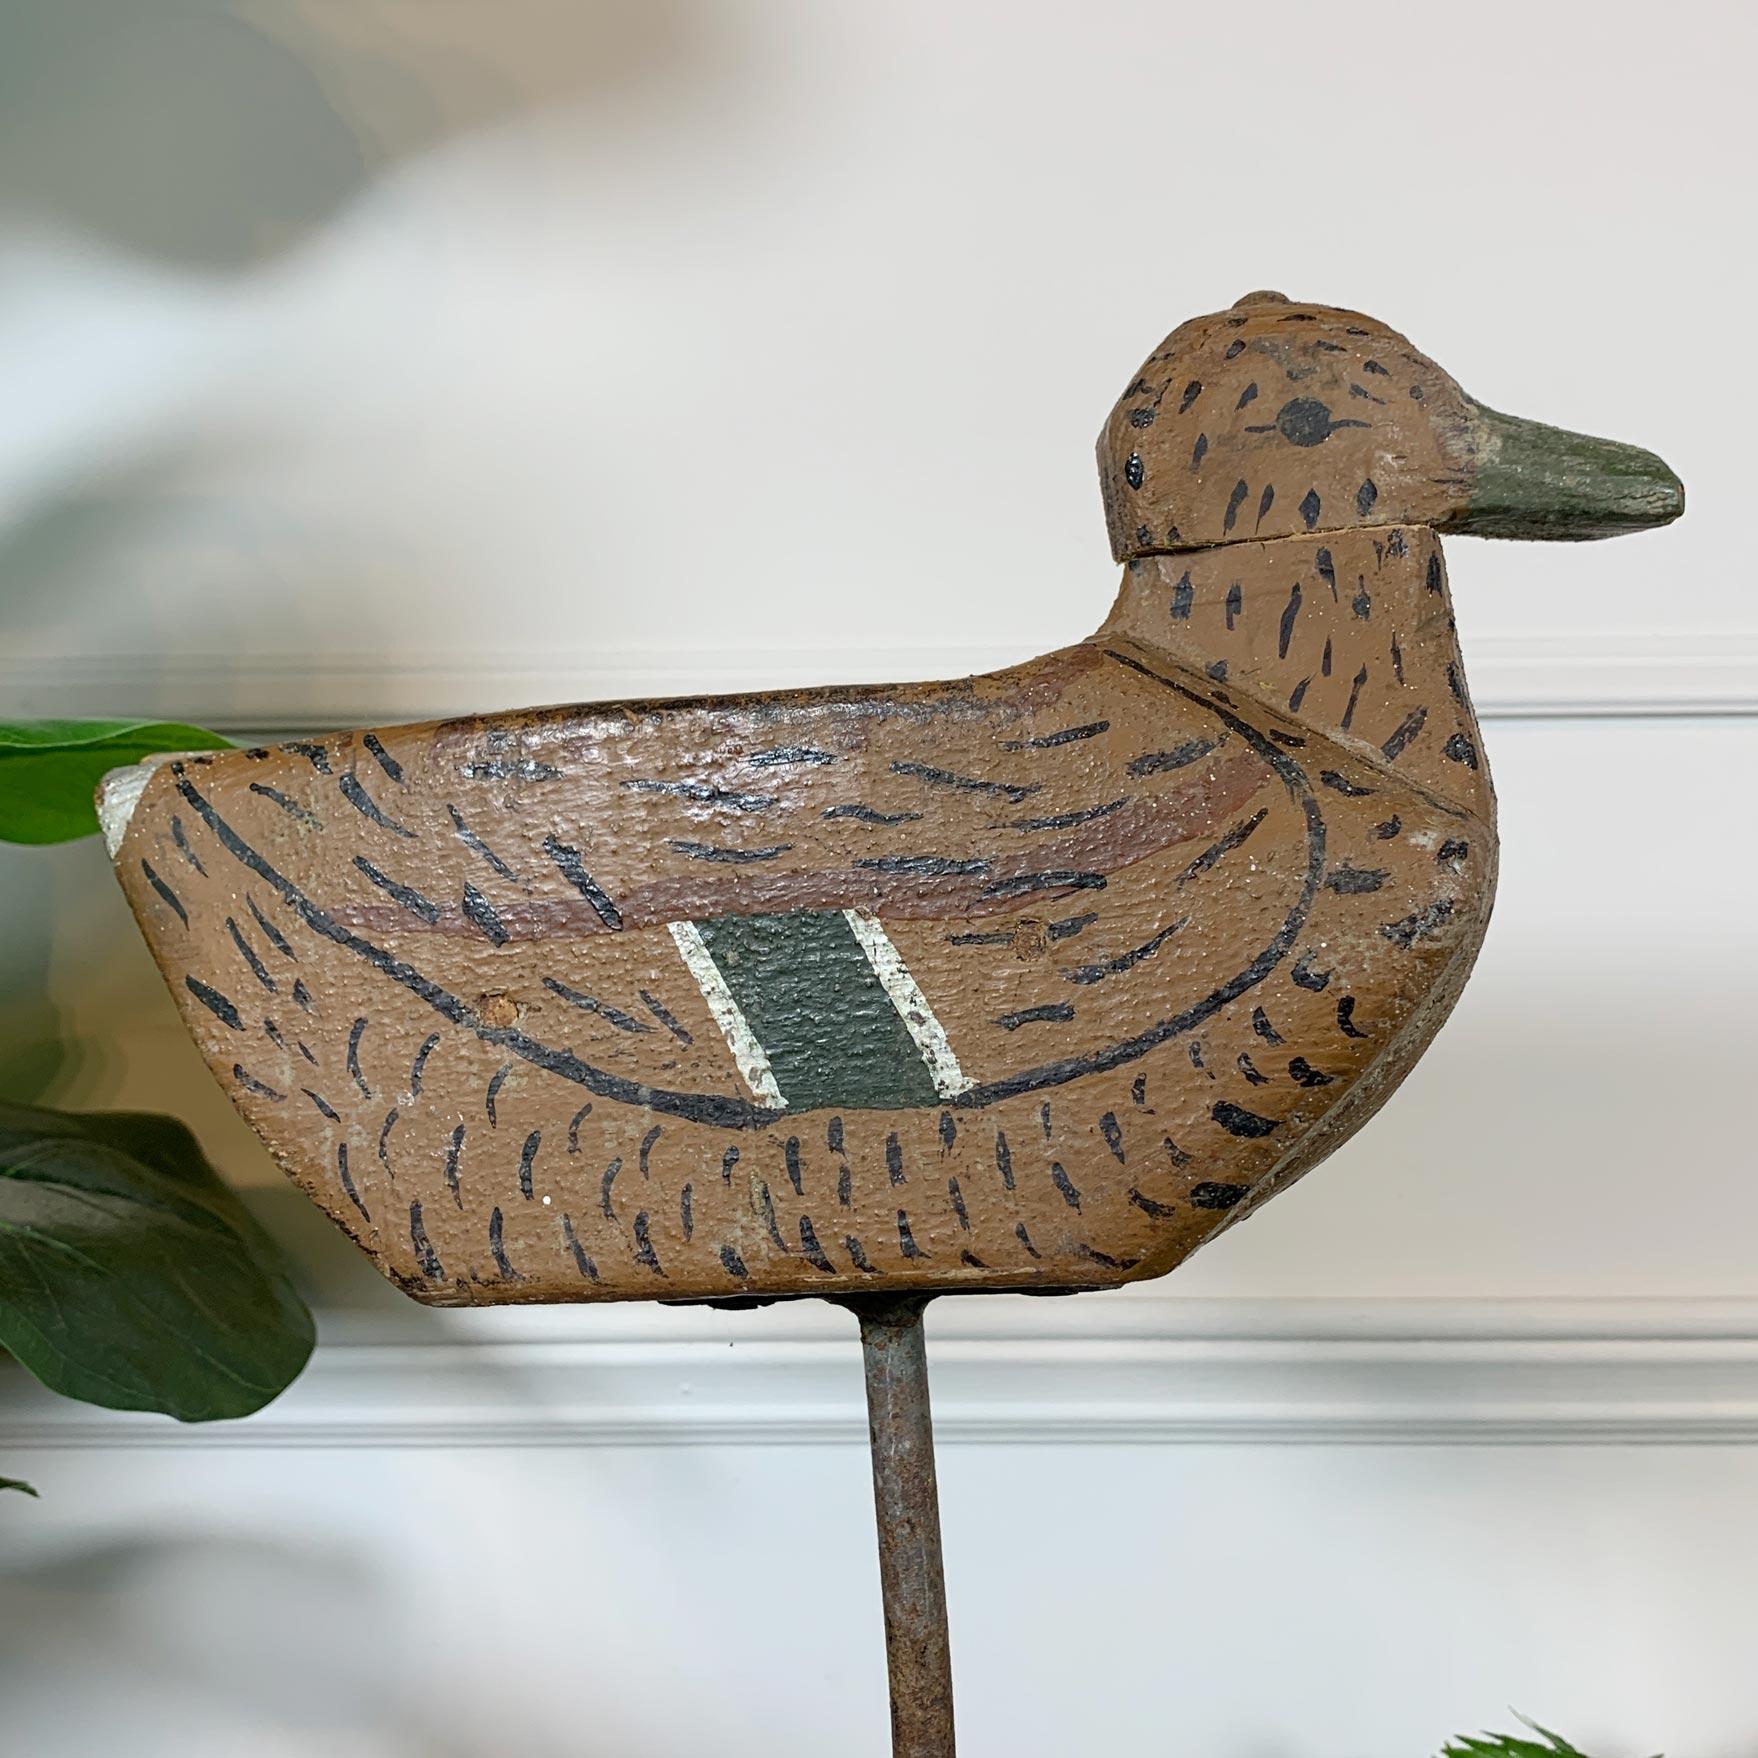 Beautiful early 20th century French decoy duck. Hand carved in wood and hand painted, the decoy has a movable head that can be turned left or right, it is also mounted on a long iron pole which allowed it to be easily pushed into the ground wherever